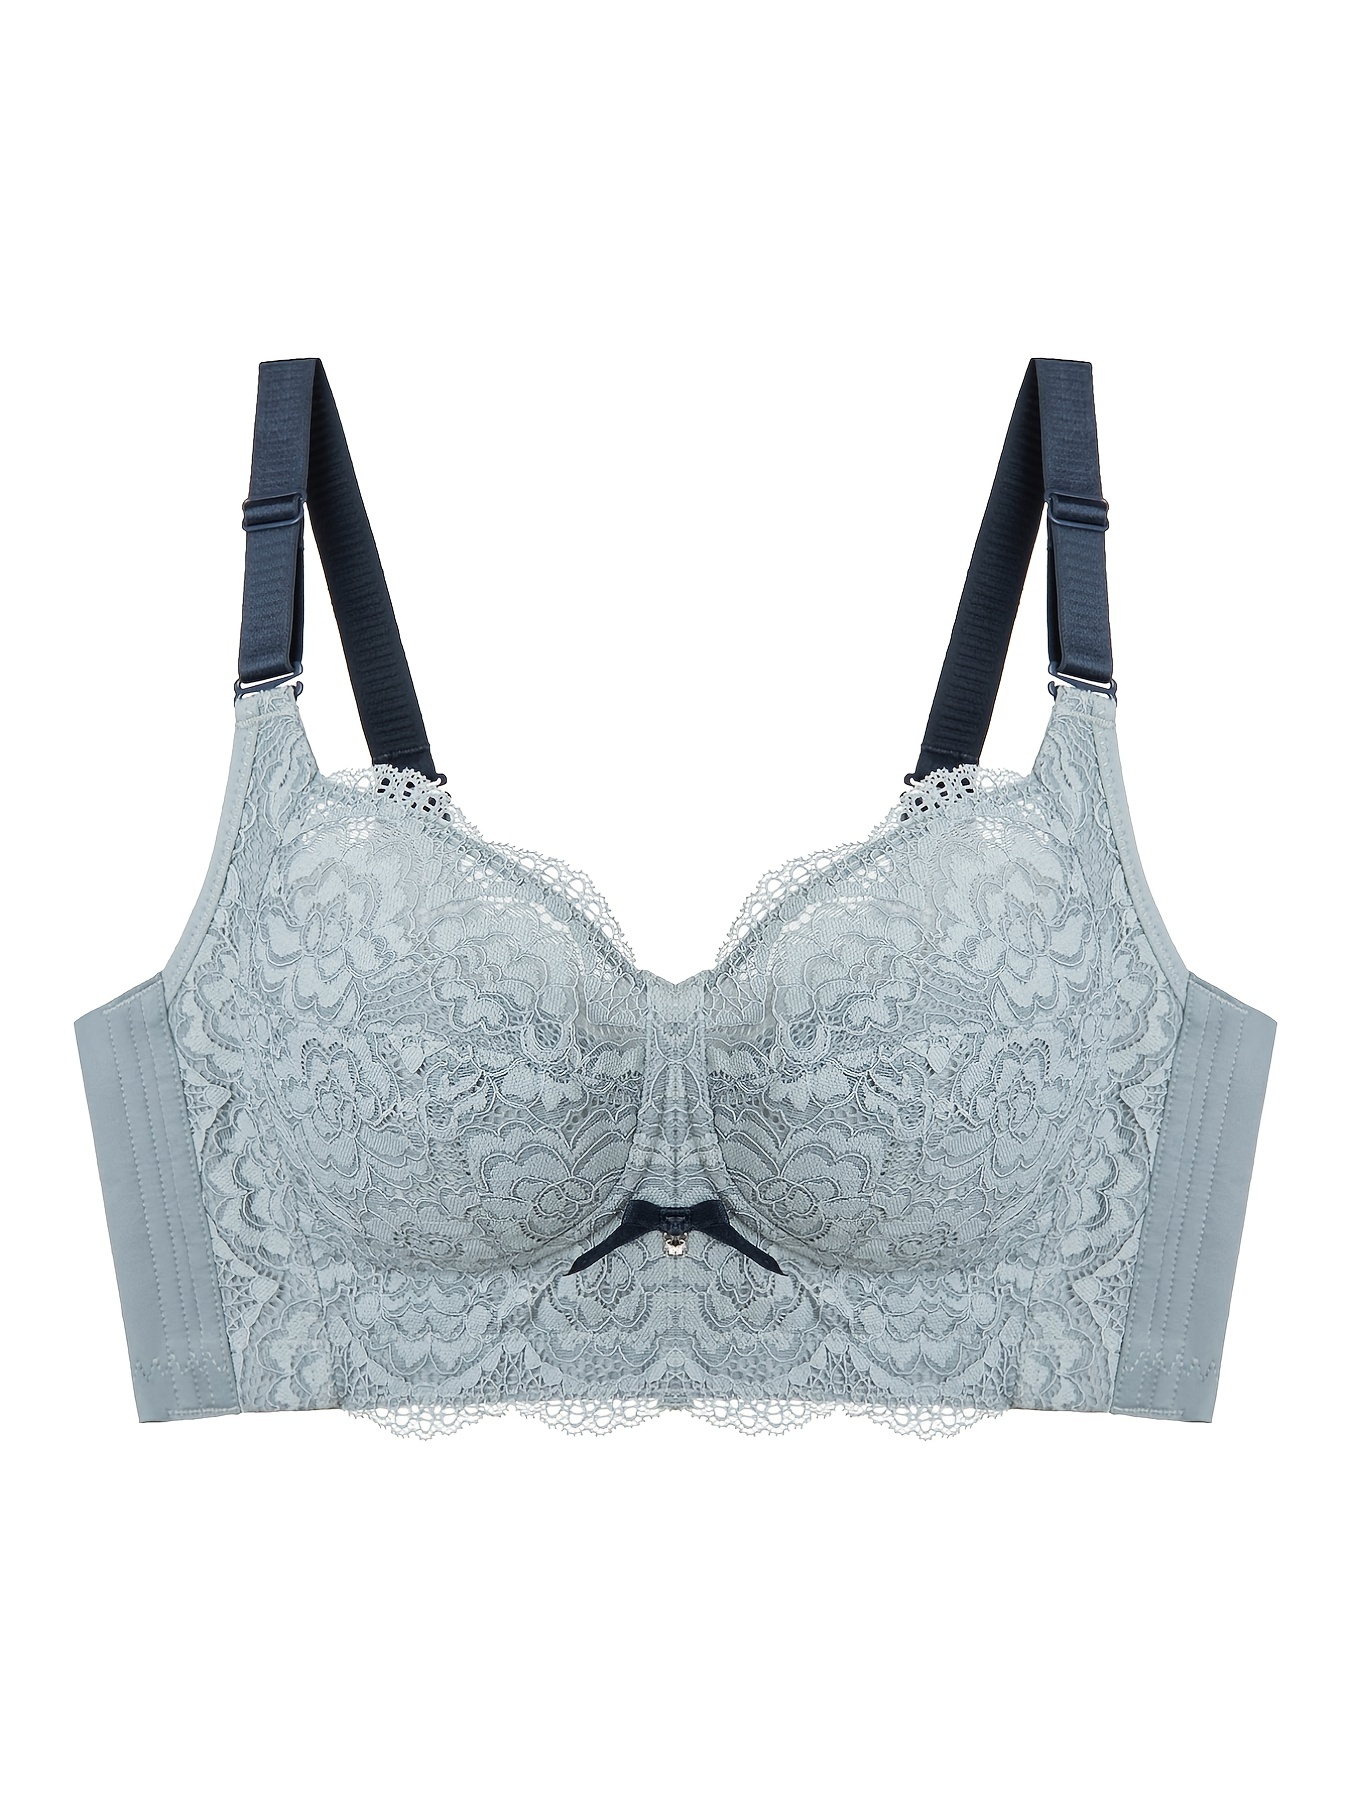  Womens Full Coverage Floral Lace Underwired Bra Plus Size  Non Padded Comfort Bra 32DDD Grey